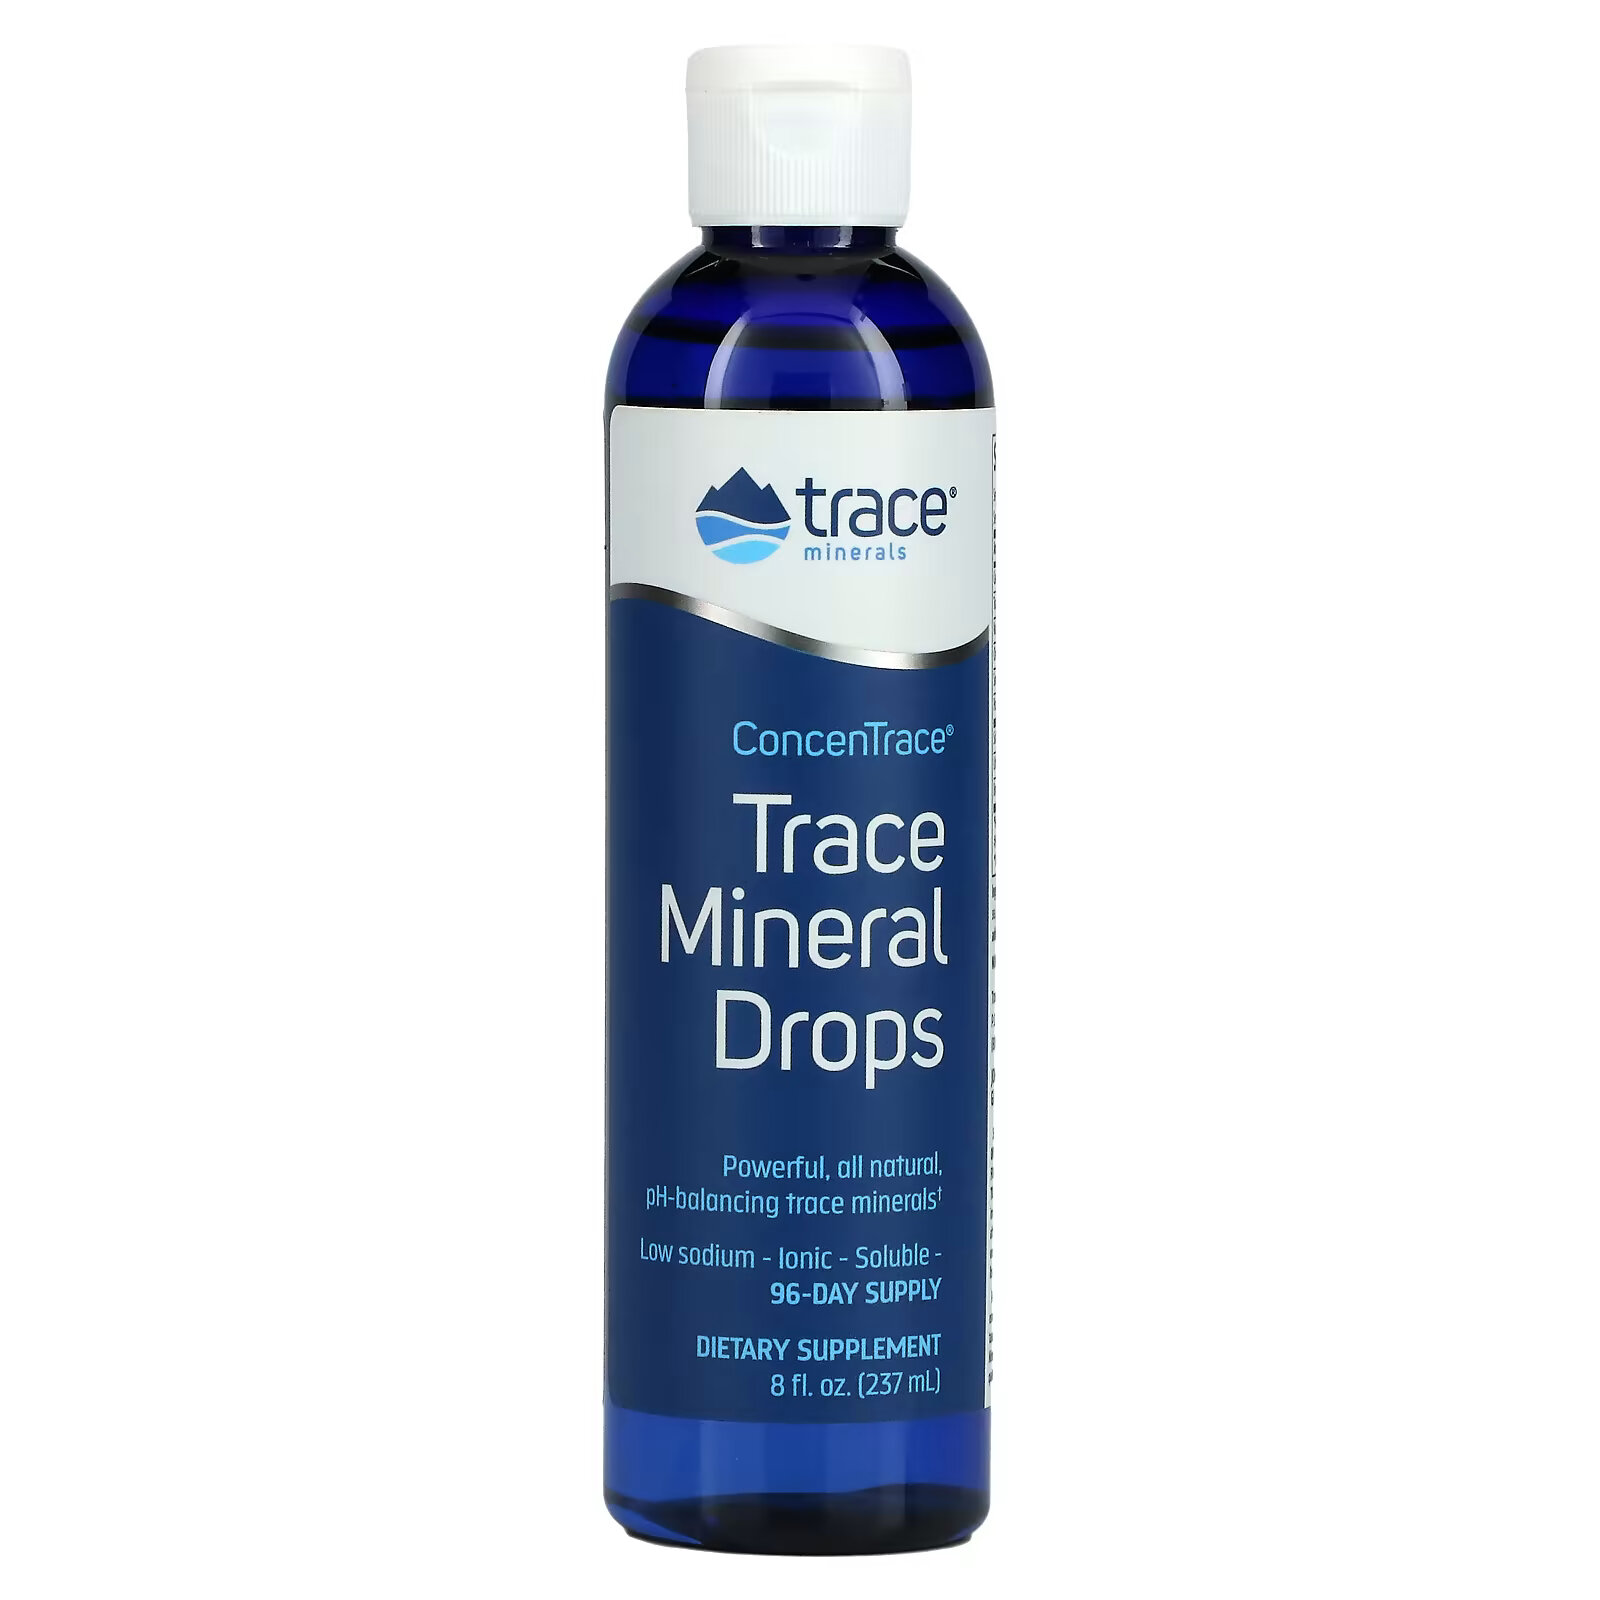 Trace Minerals ConcenTrace, микроэлементы в форме капель, 237 мл пищевая добавка trace minerals concentrace trace mineral drops 237 мл